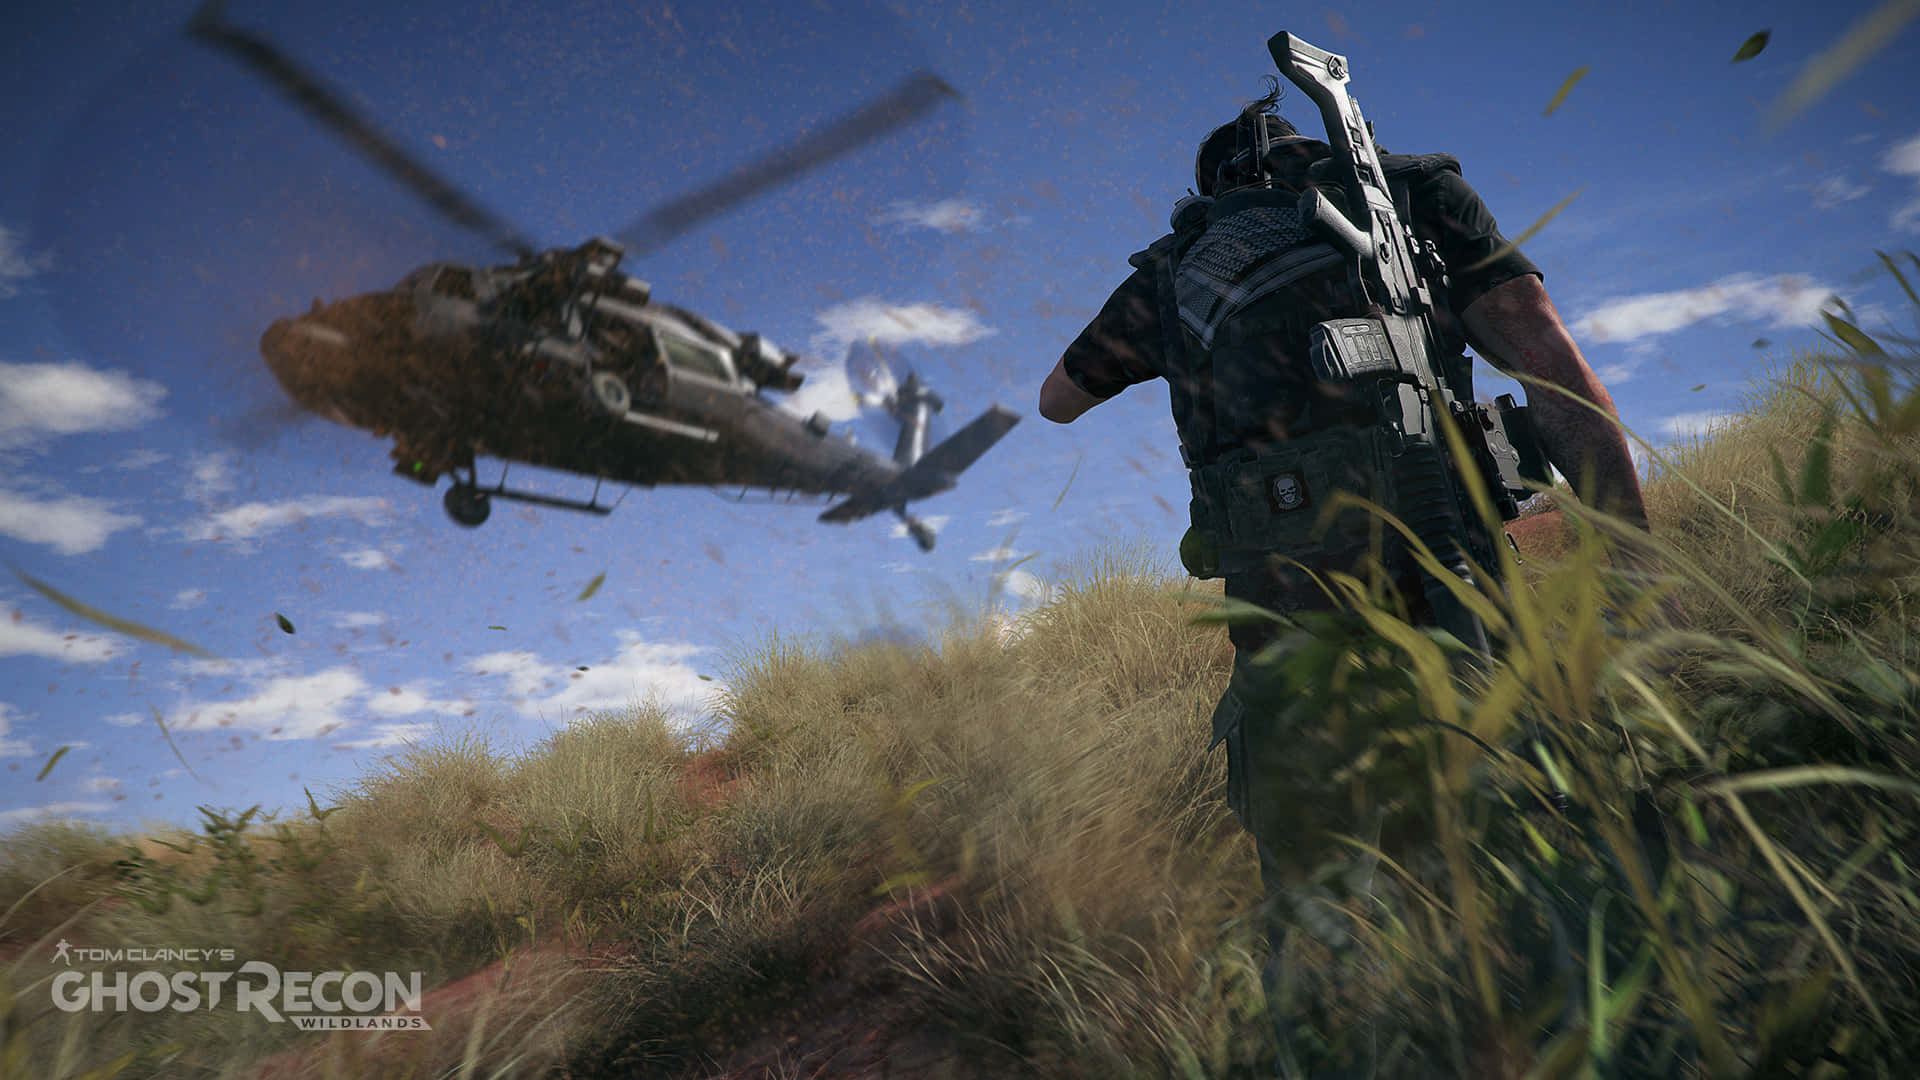 Hd Ghost Recon Wildlands Background Soldier Approaching A Helicopter